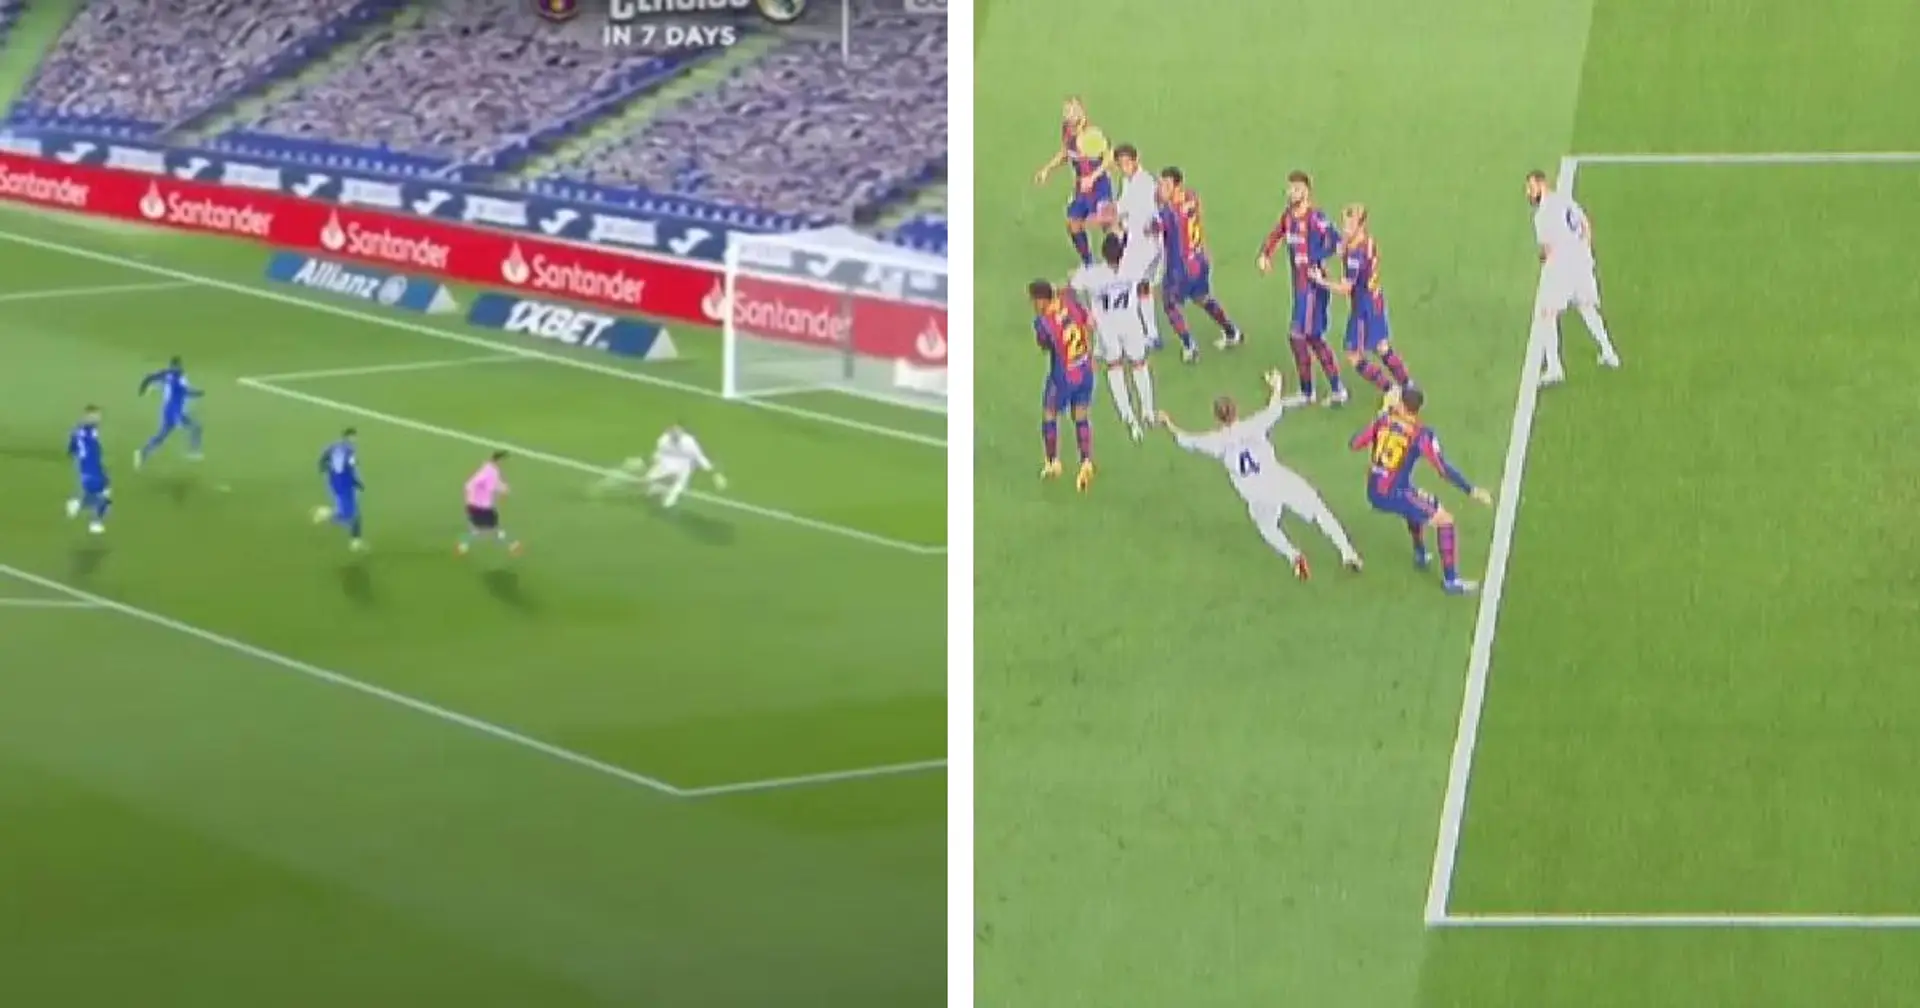 5 times Barca have been really unlucky this season